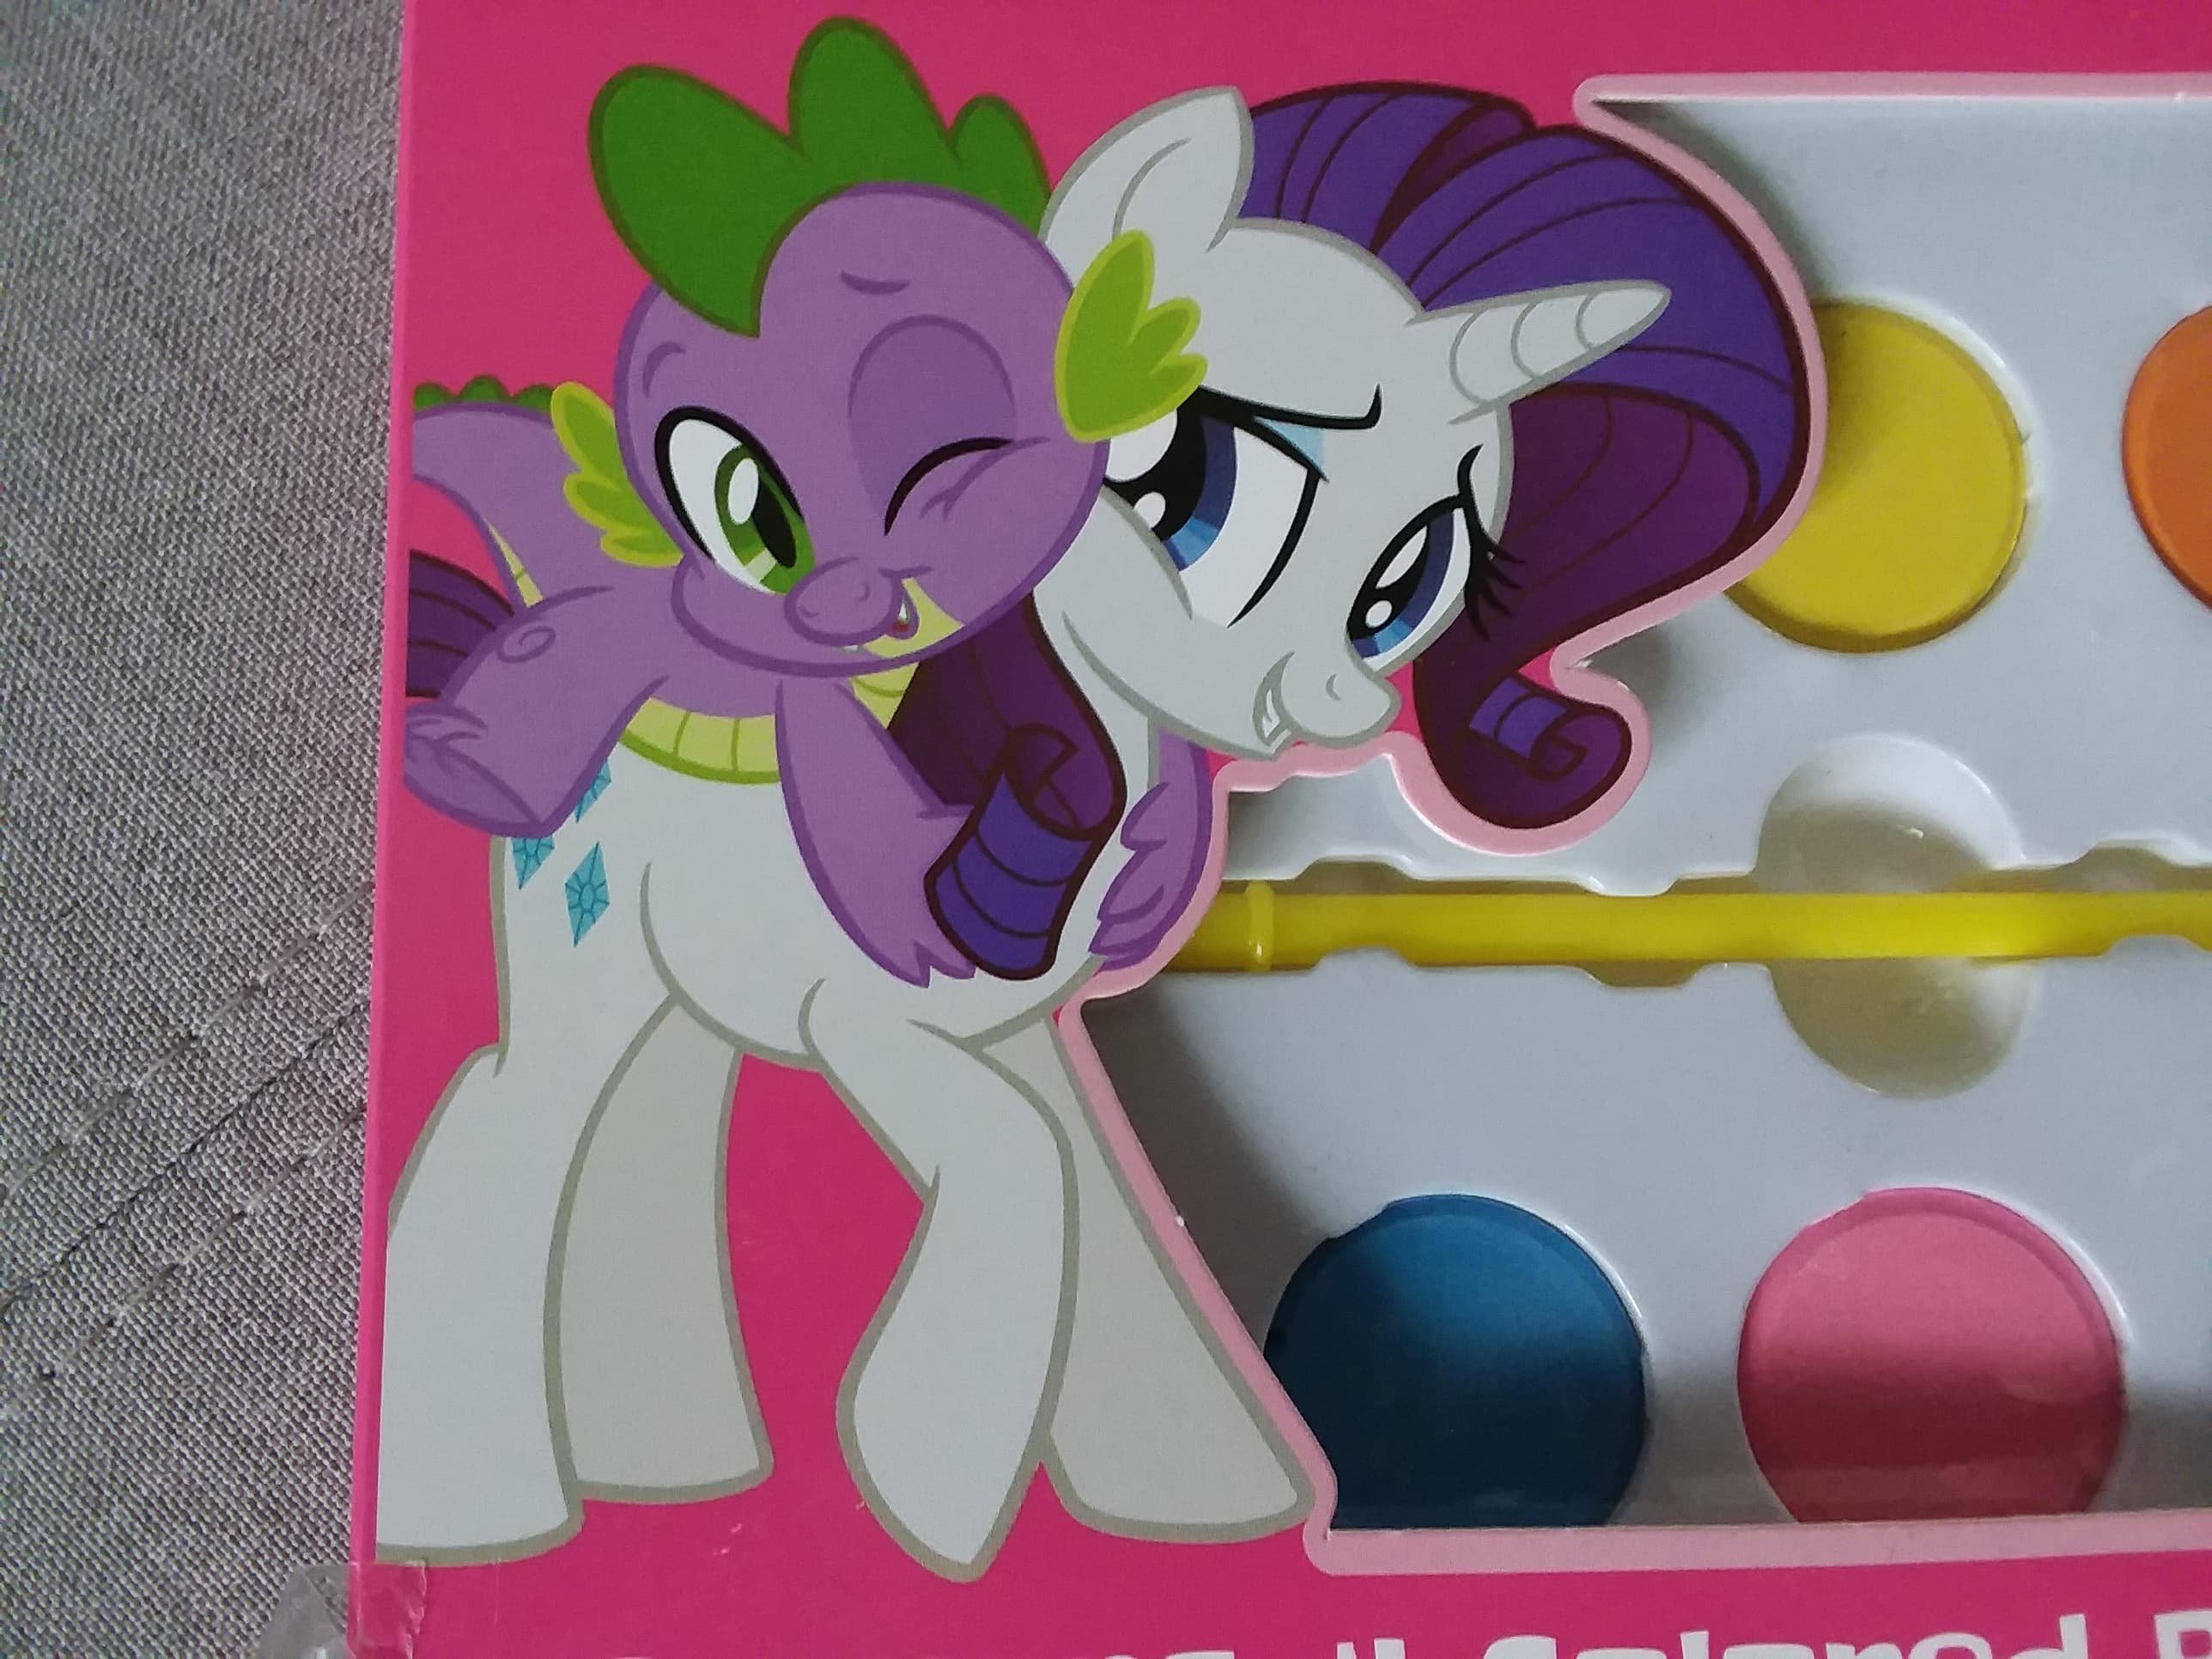 Seems Even Hasbro (Or At Least Those Close to Hasbro, That Work on